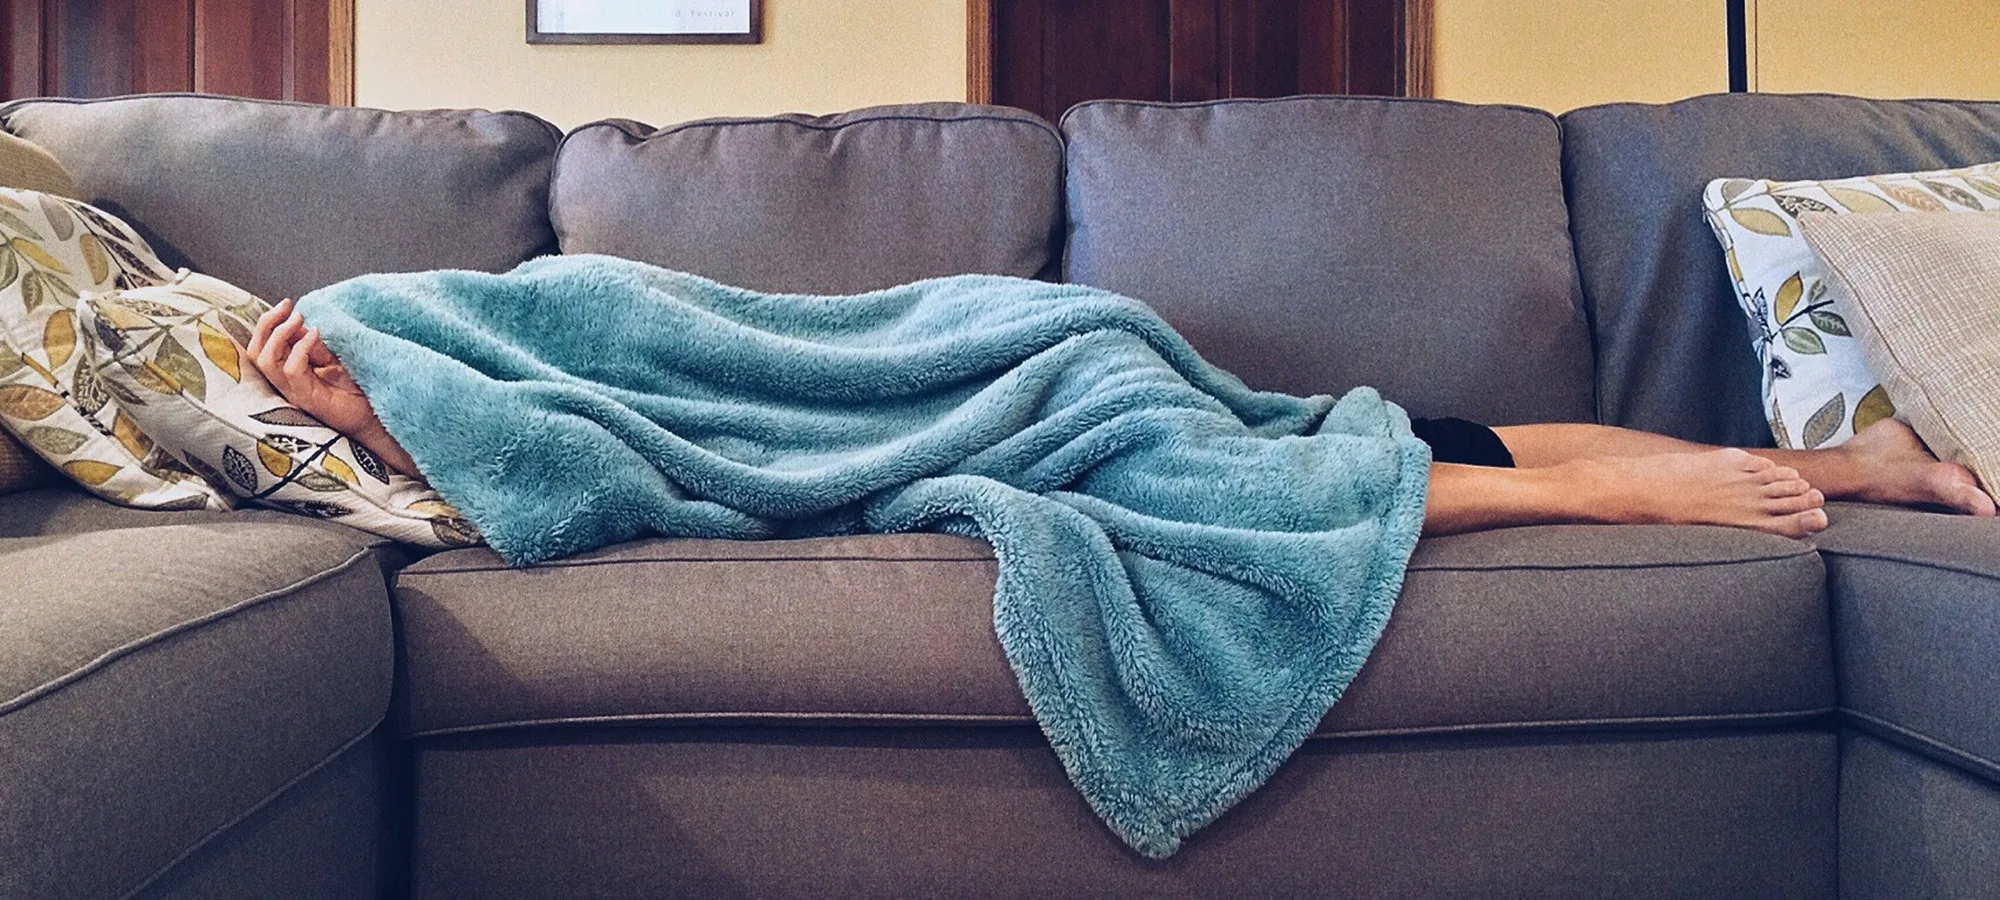 person lying down on a couch with a blanket on